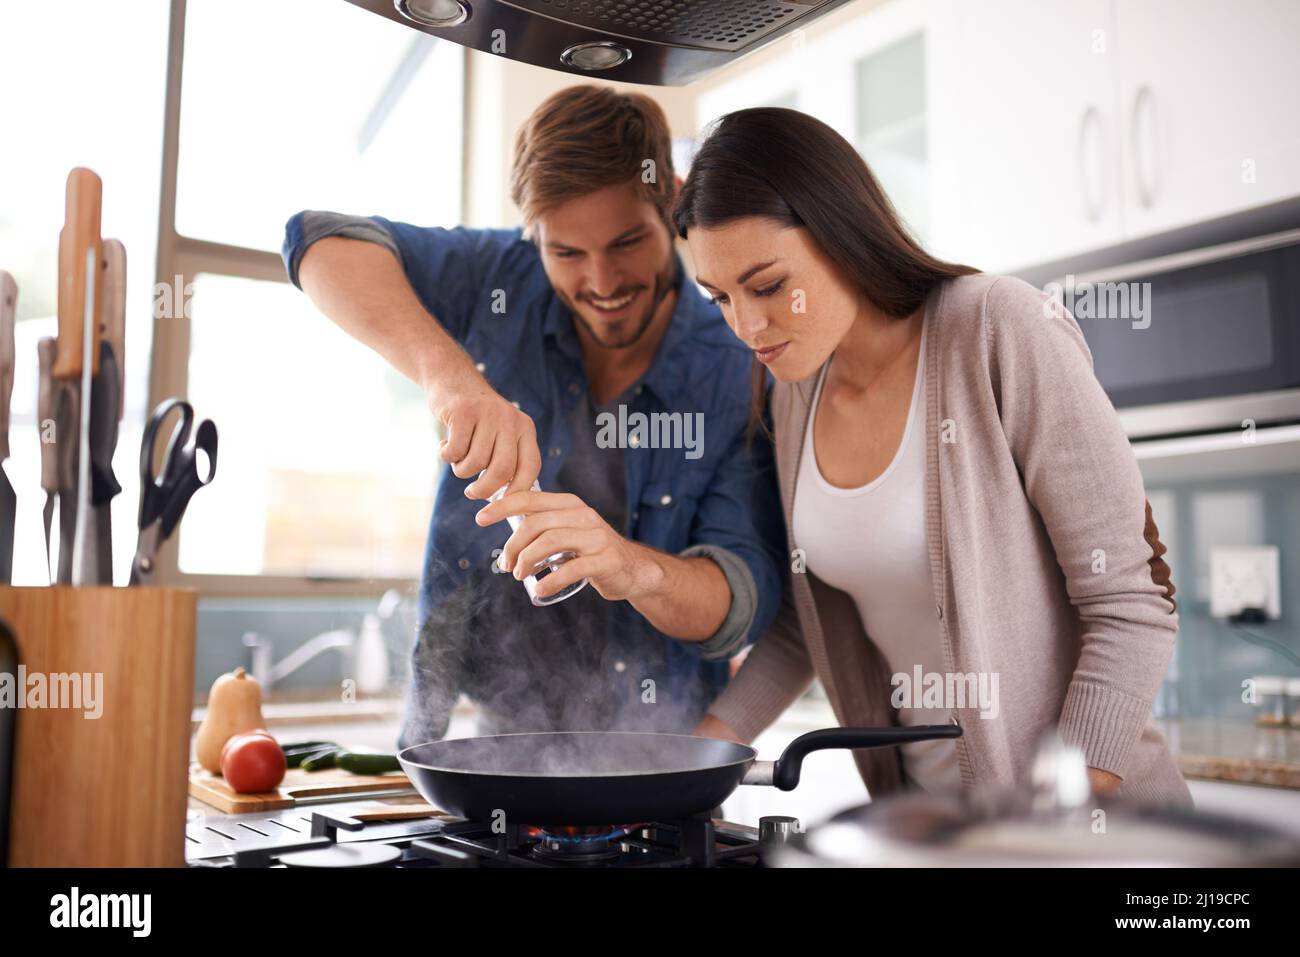 Preparing a delicious meal at home. A young couple making dinner together at home. Stock Photo